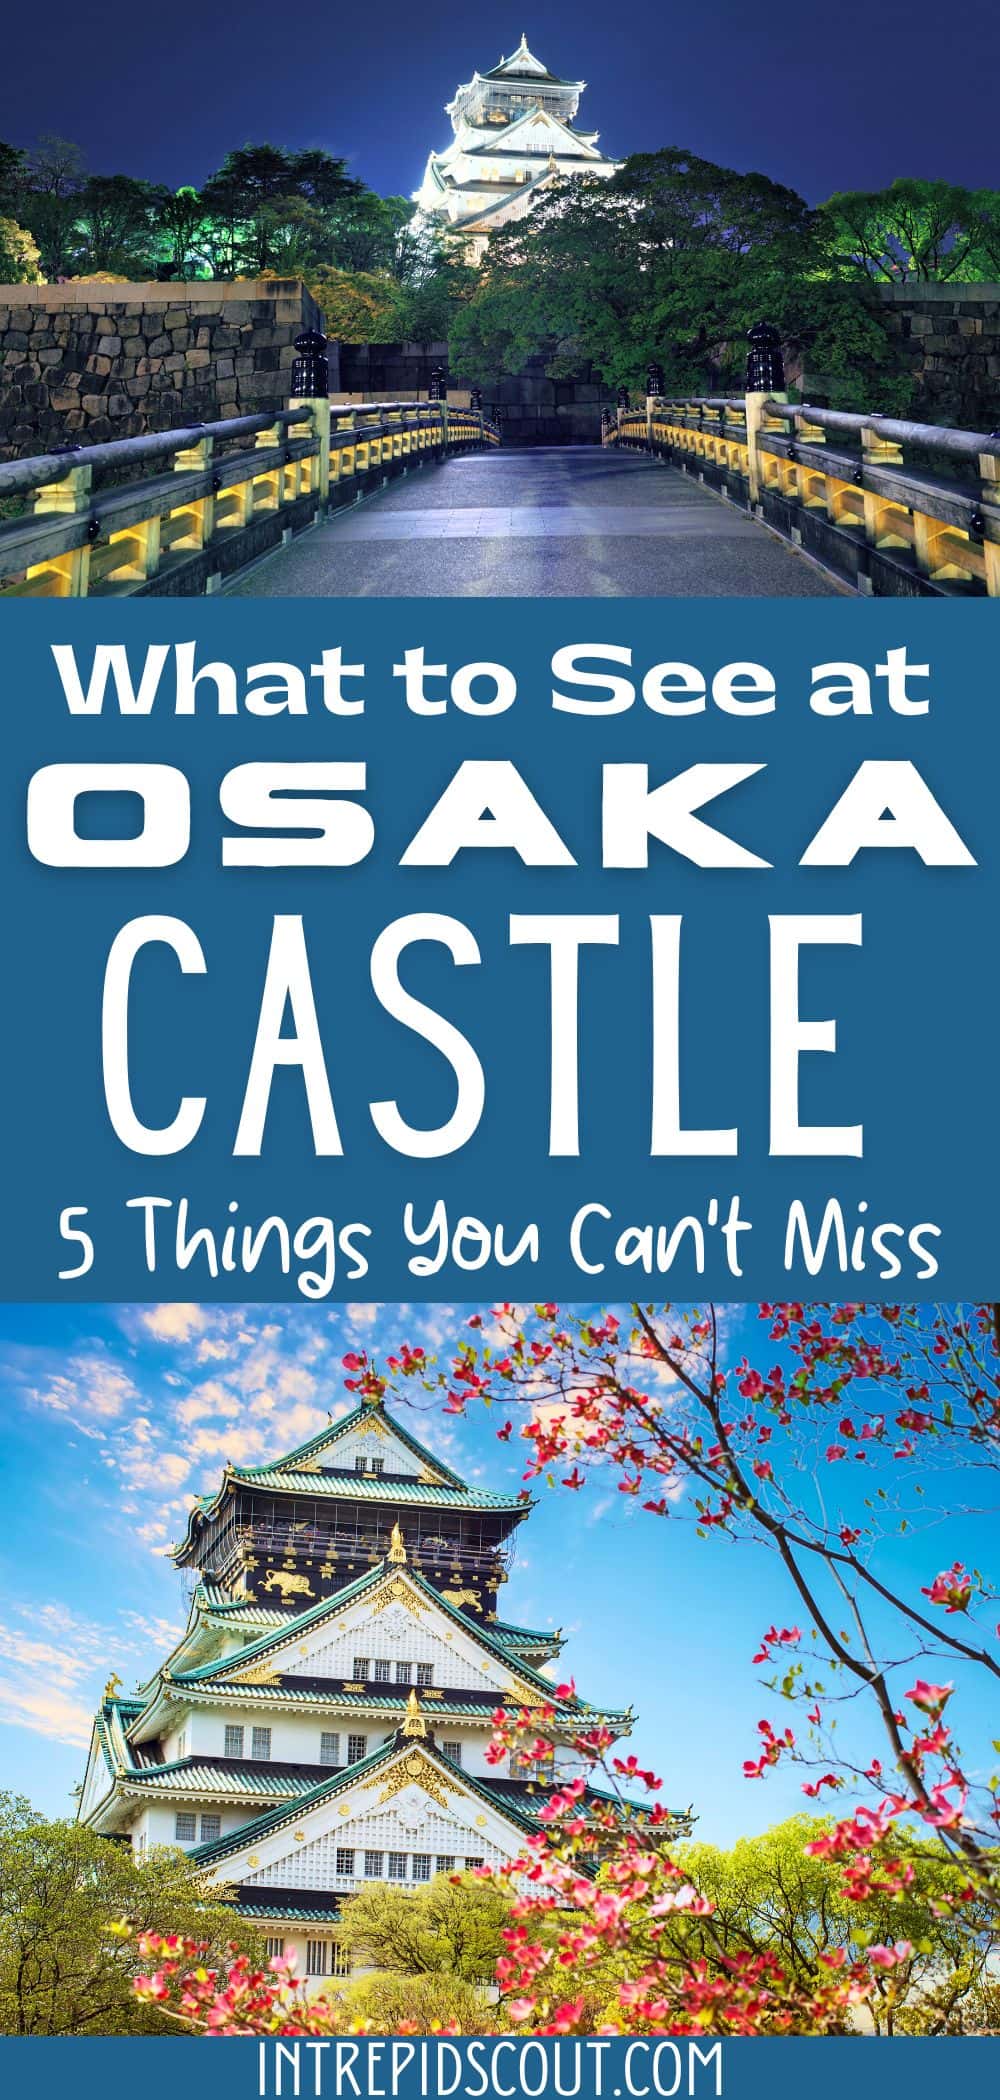 What to See at Osaka Castle